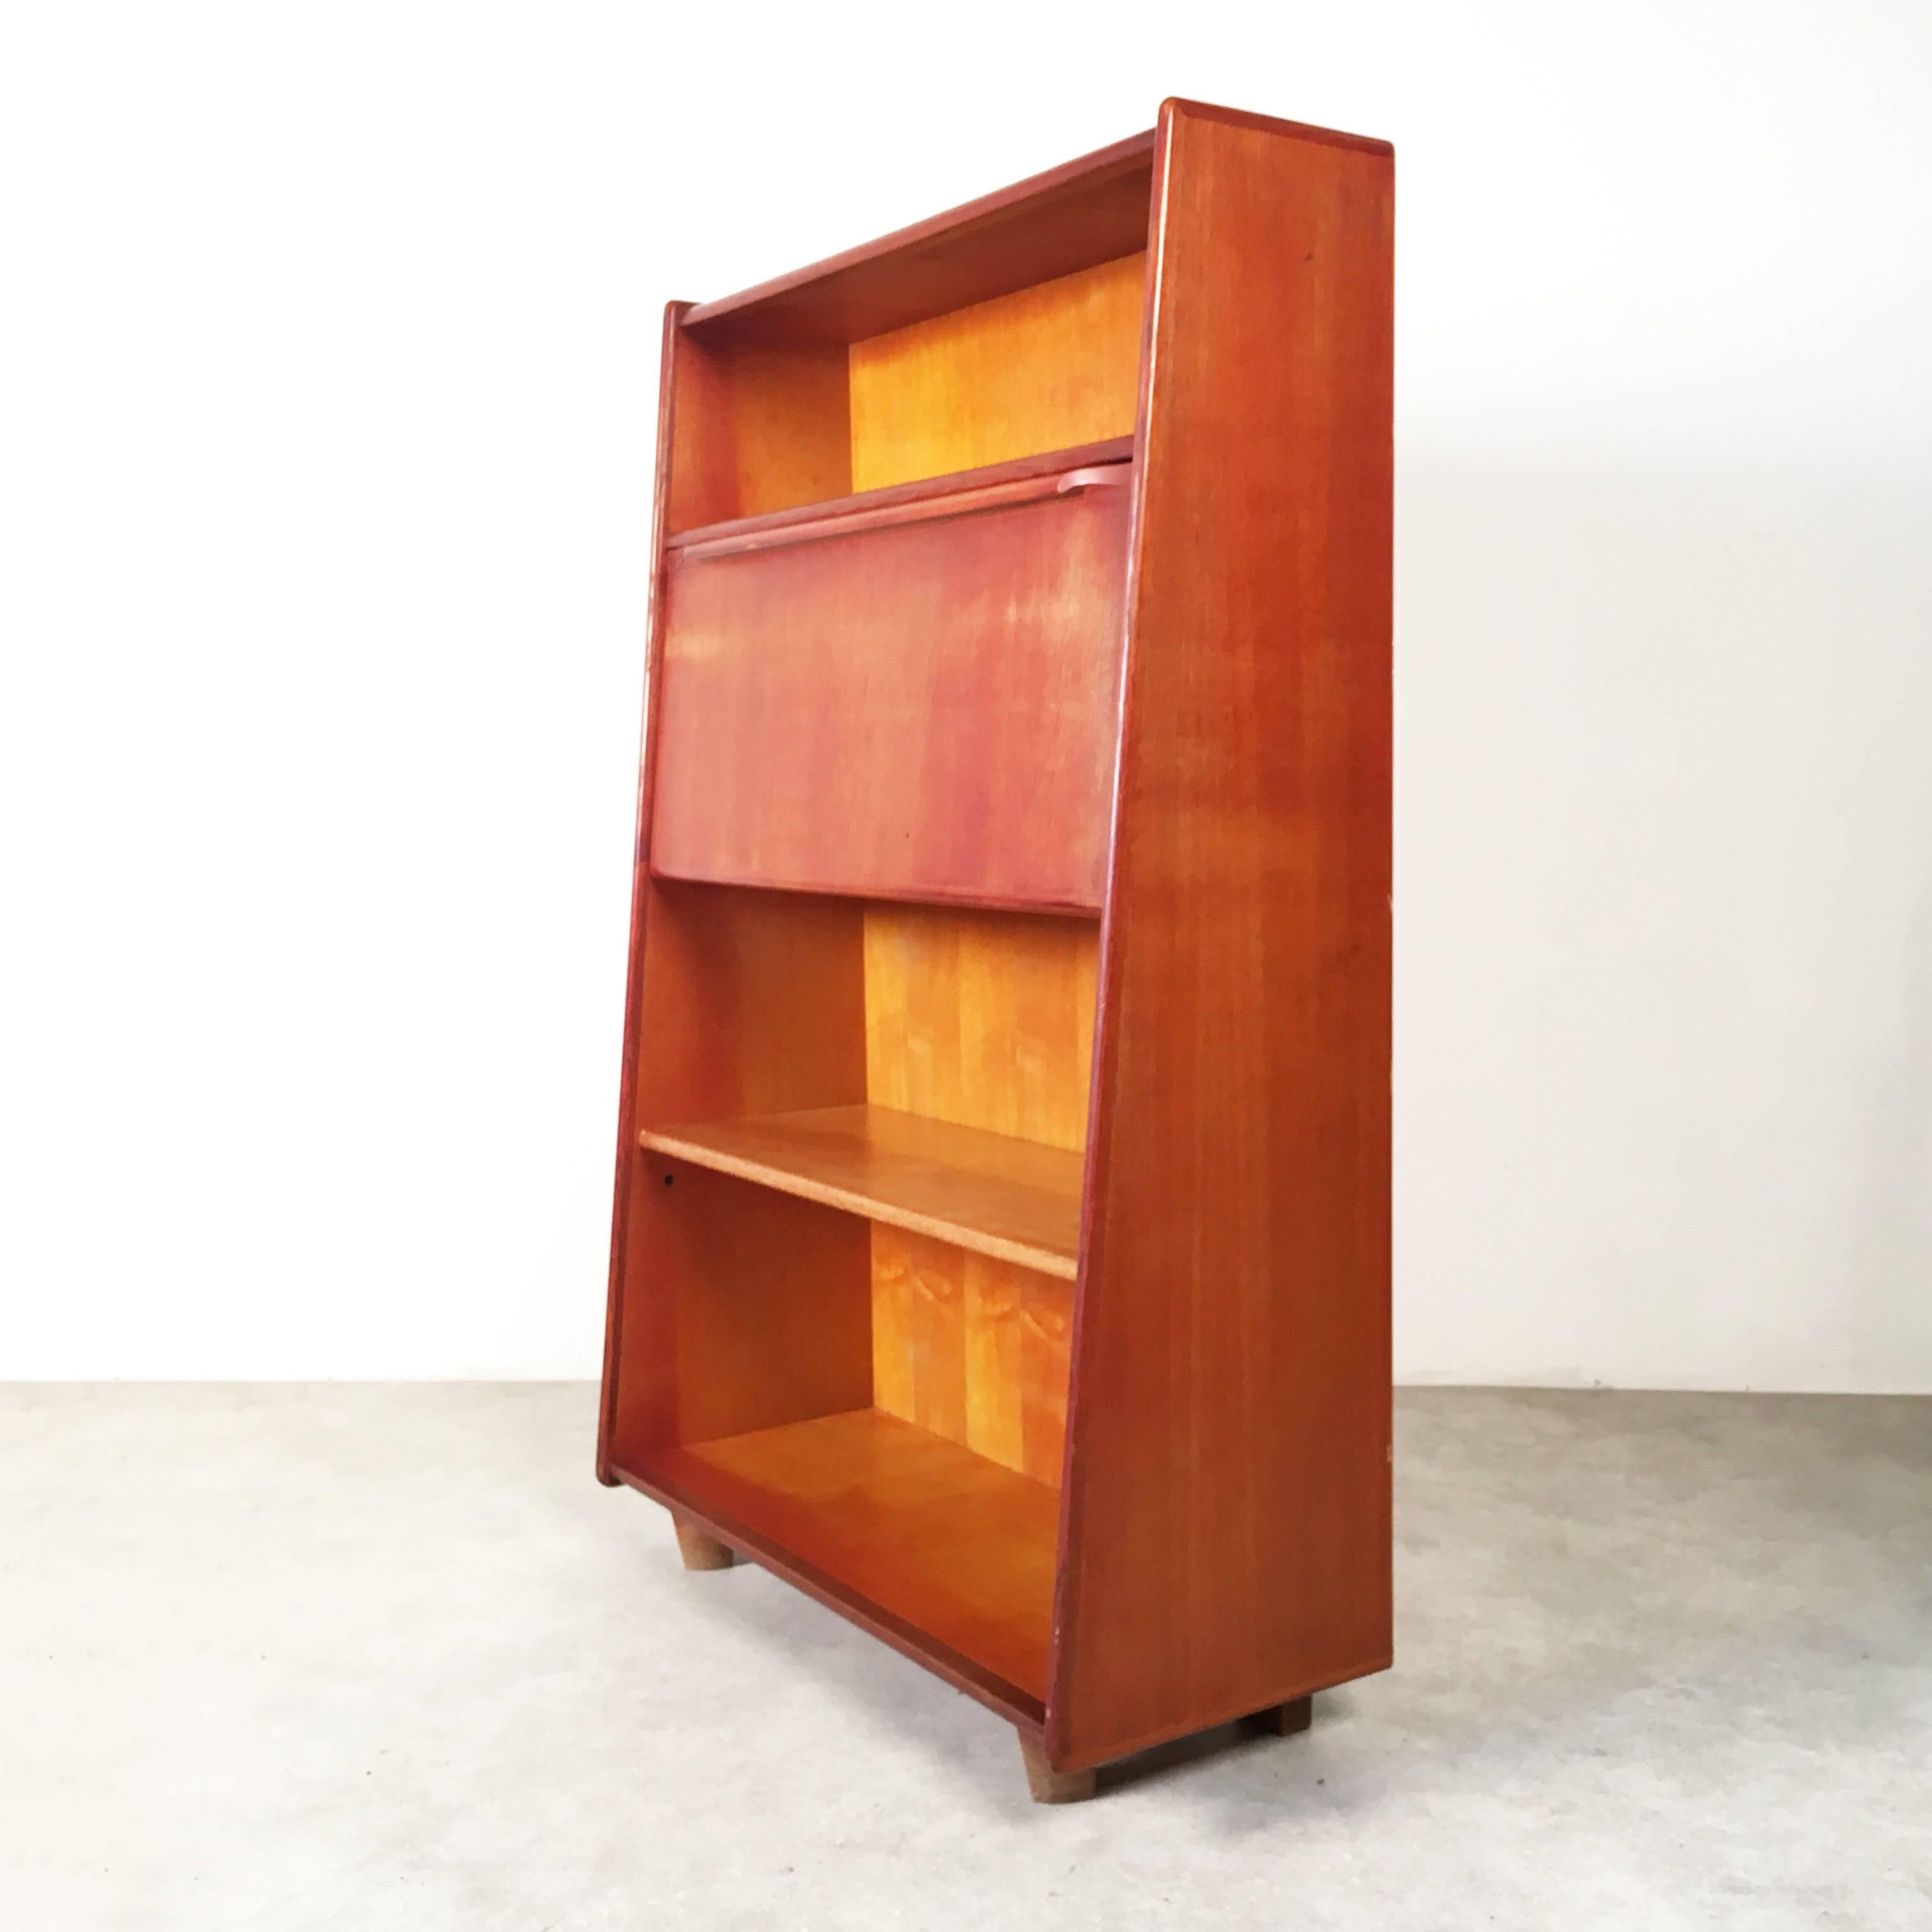 Secterary from the Oak series, designed in 1956 by Cees Braakman, manufactured in the Netherlands by UMS Pastoe. The Oak series was Braakman's first big success, with more to follow. Pieces from this series are now considered as outstanding examples